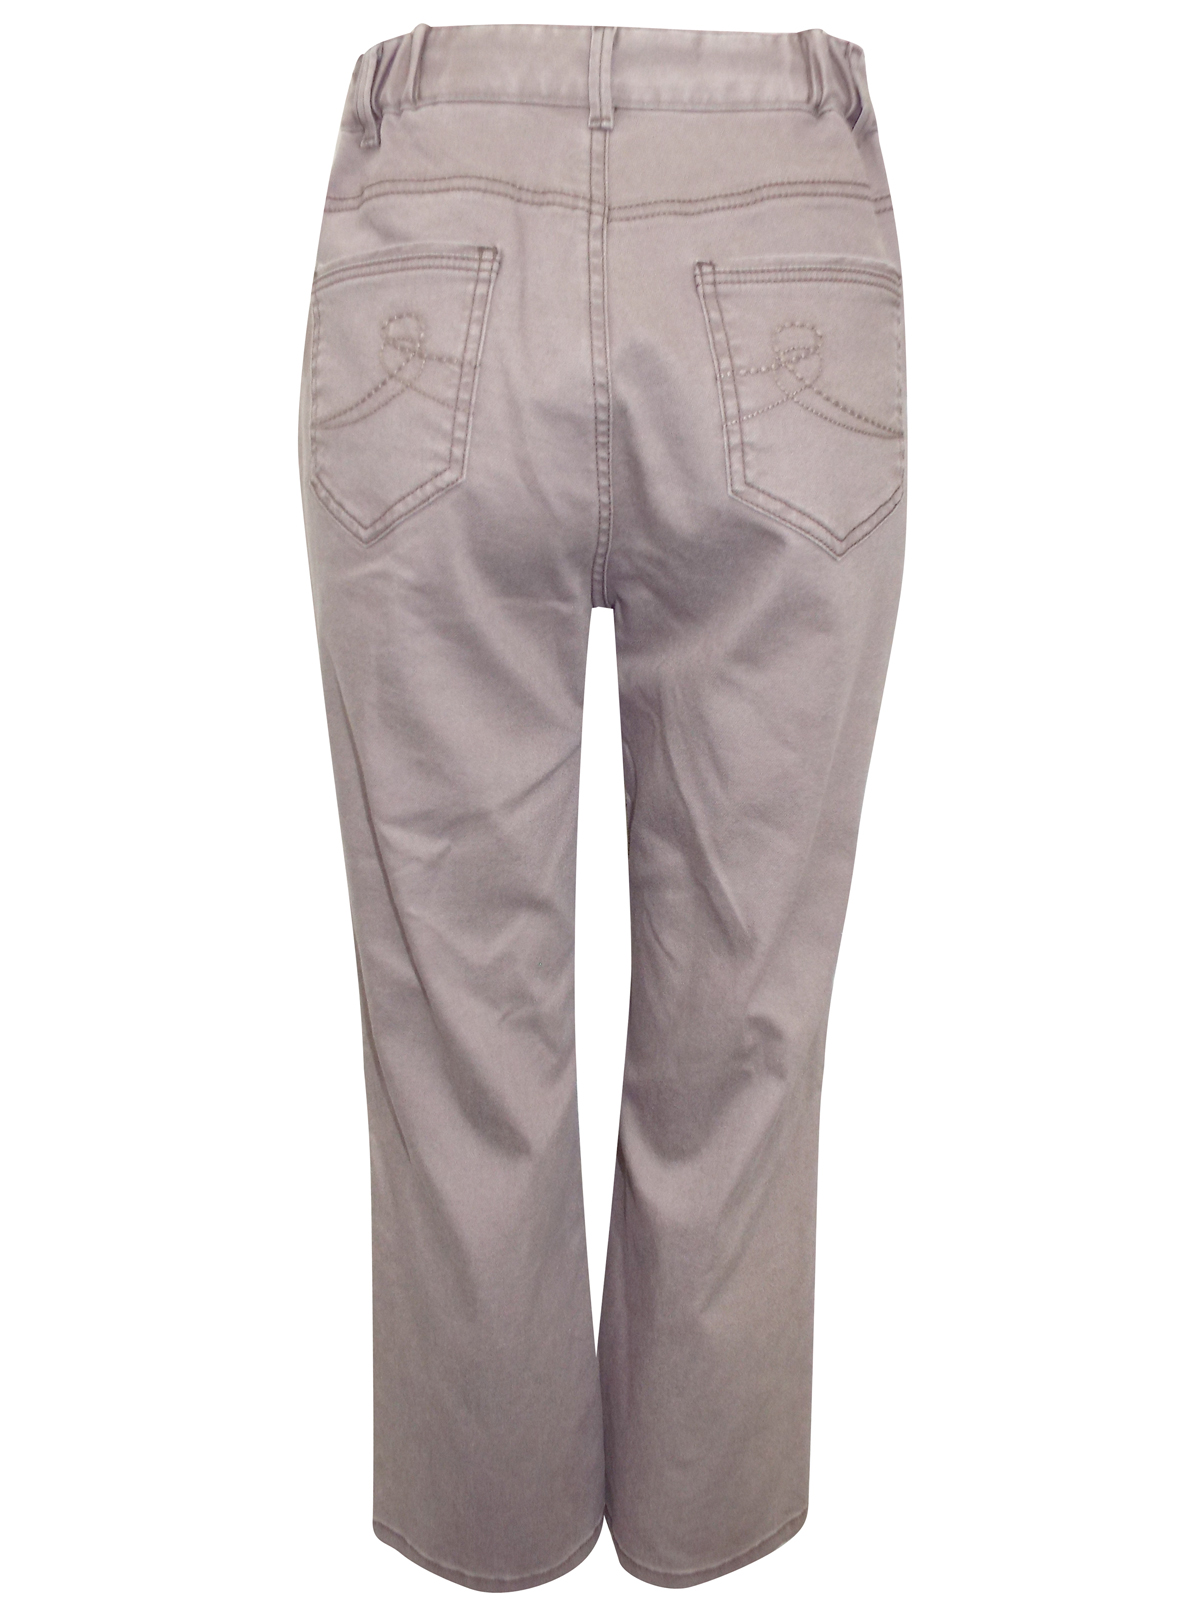 Marks and Spencer - - M&5 MINK Cotton Rich Cropped Trousers - Size 12 to 14